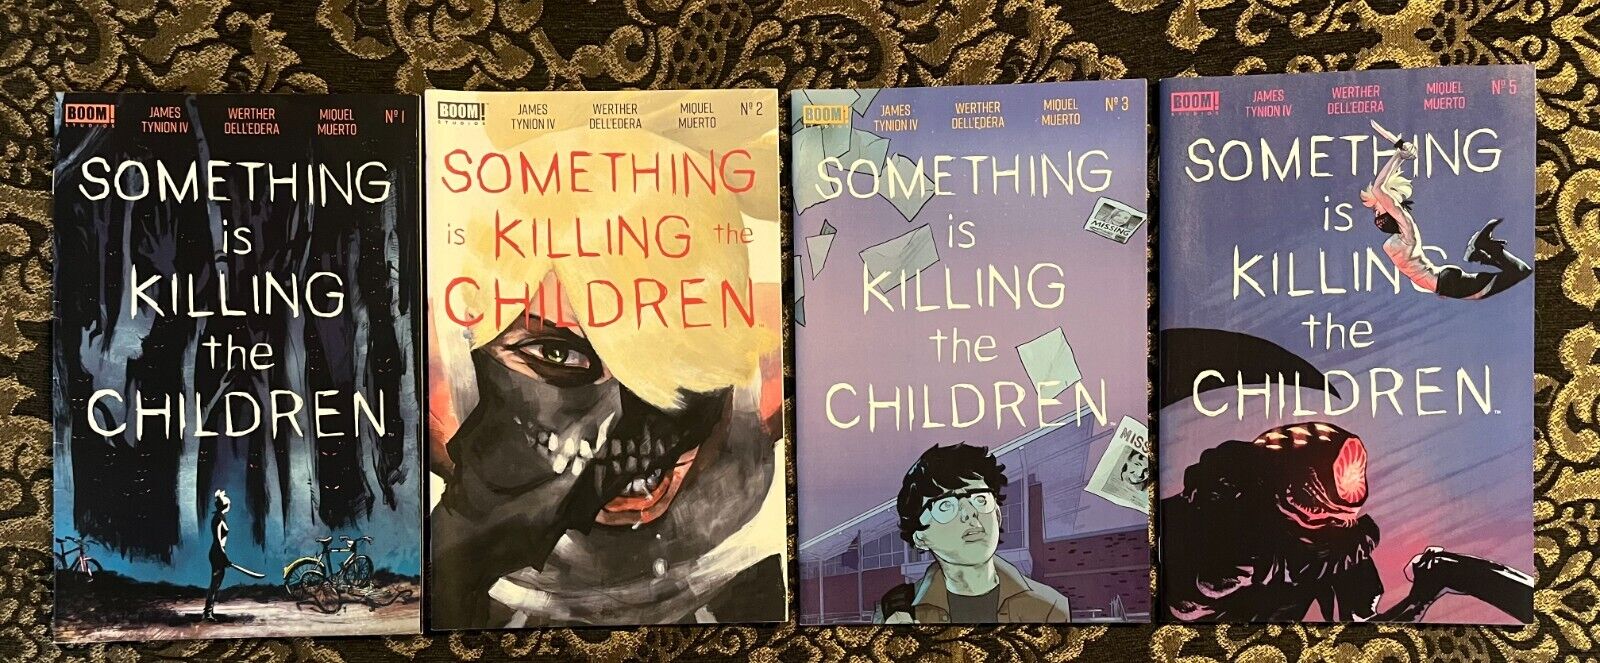 Something is Killing the Children Issue #1, #2, #3, and #5